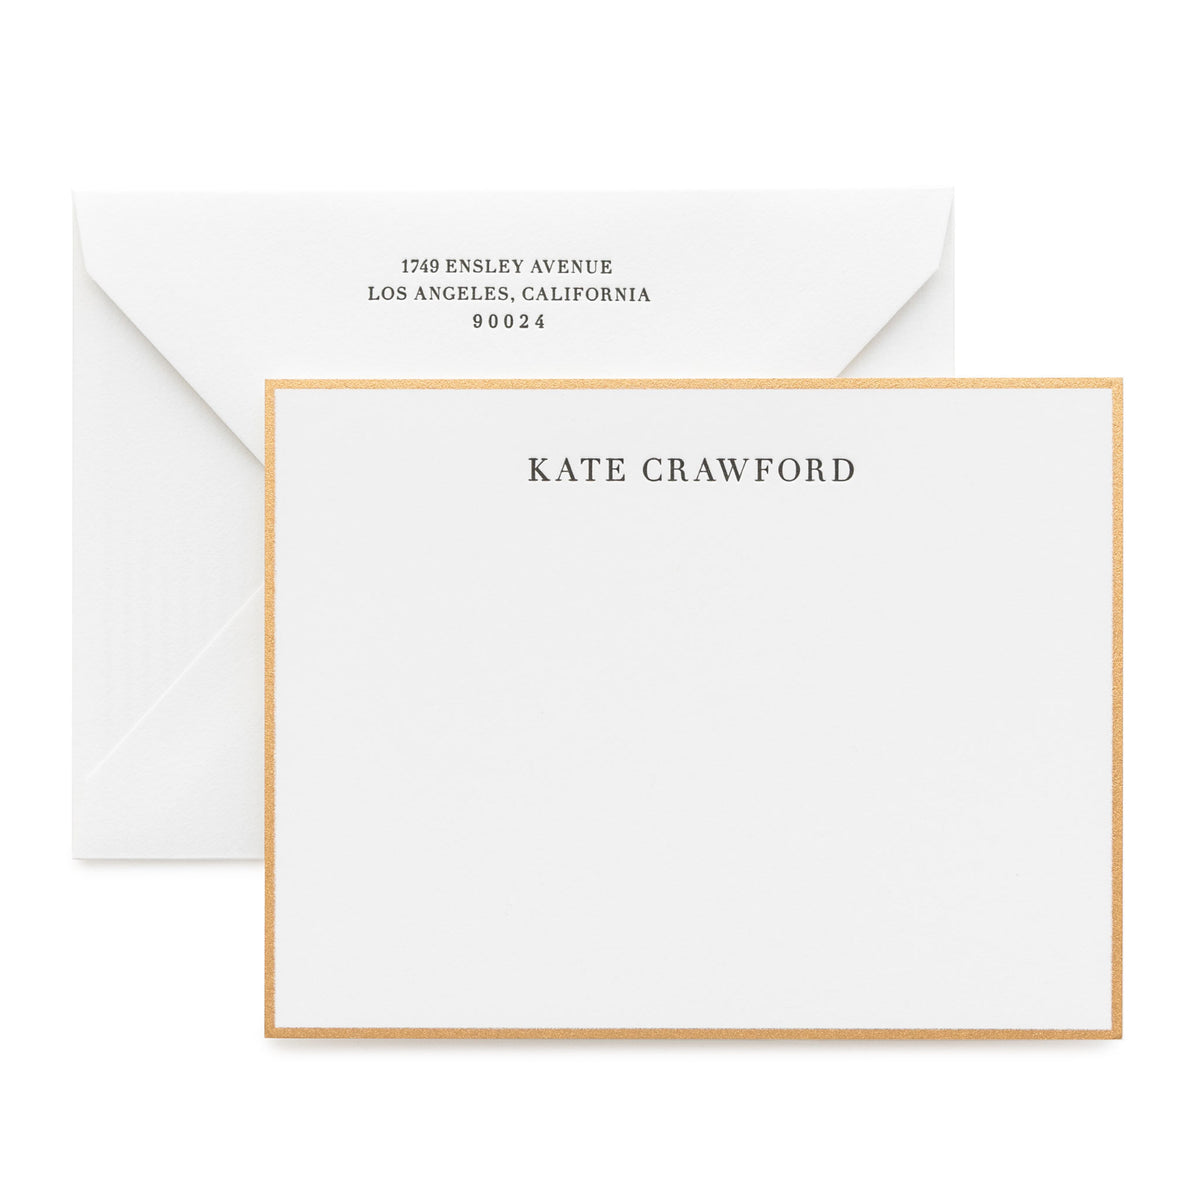 Black and white custom stationery with gold border